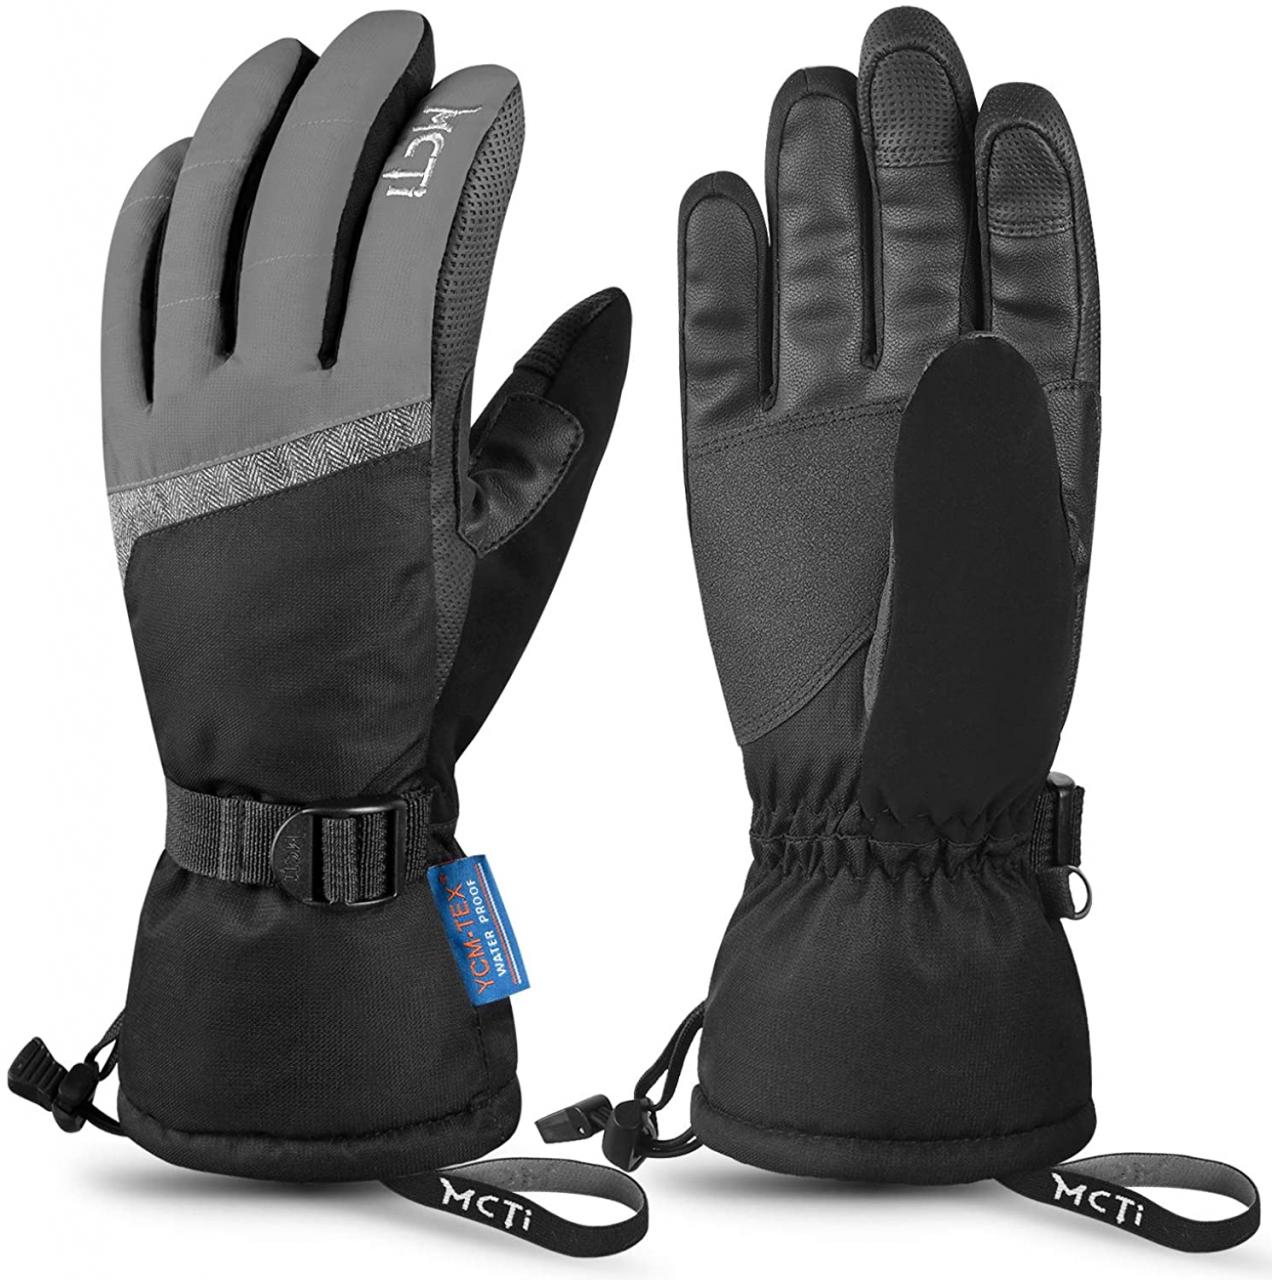 MCTi Mens Ski Gloves Waterproof Thermal Winter Warm Snowboard Snowmobile  Motorcycle Snow Work Cold Weather Gloves Windproof Gauntlet : Amazon.co.uk:  Fashion